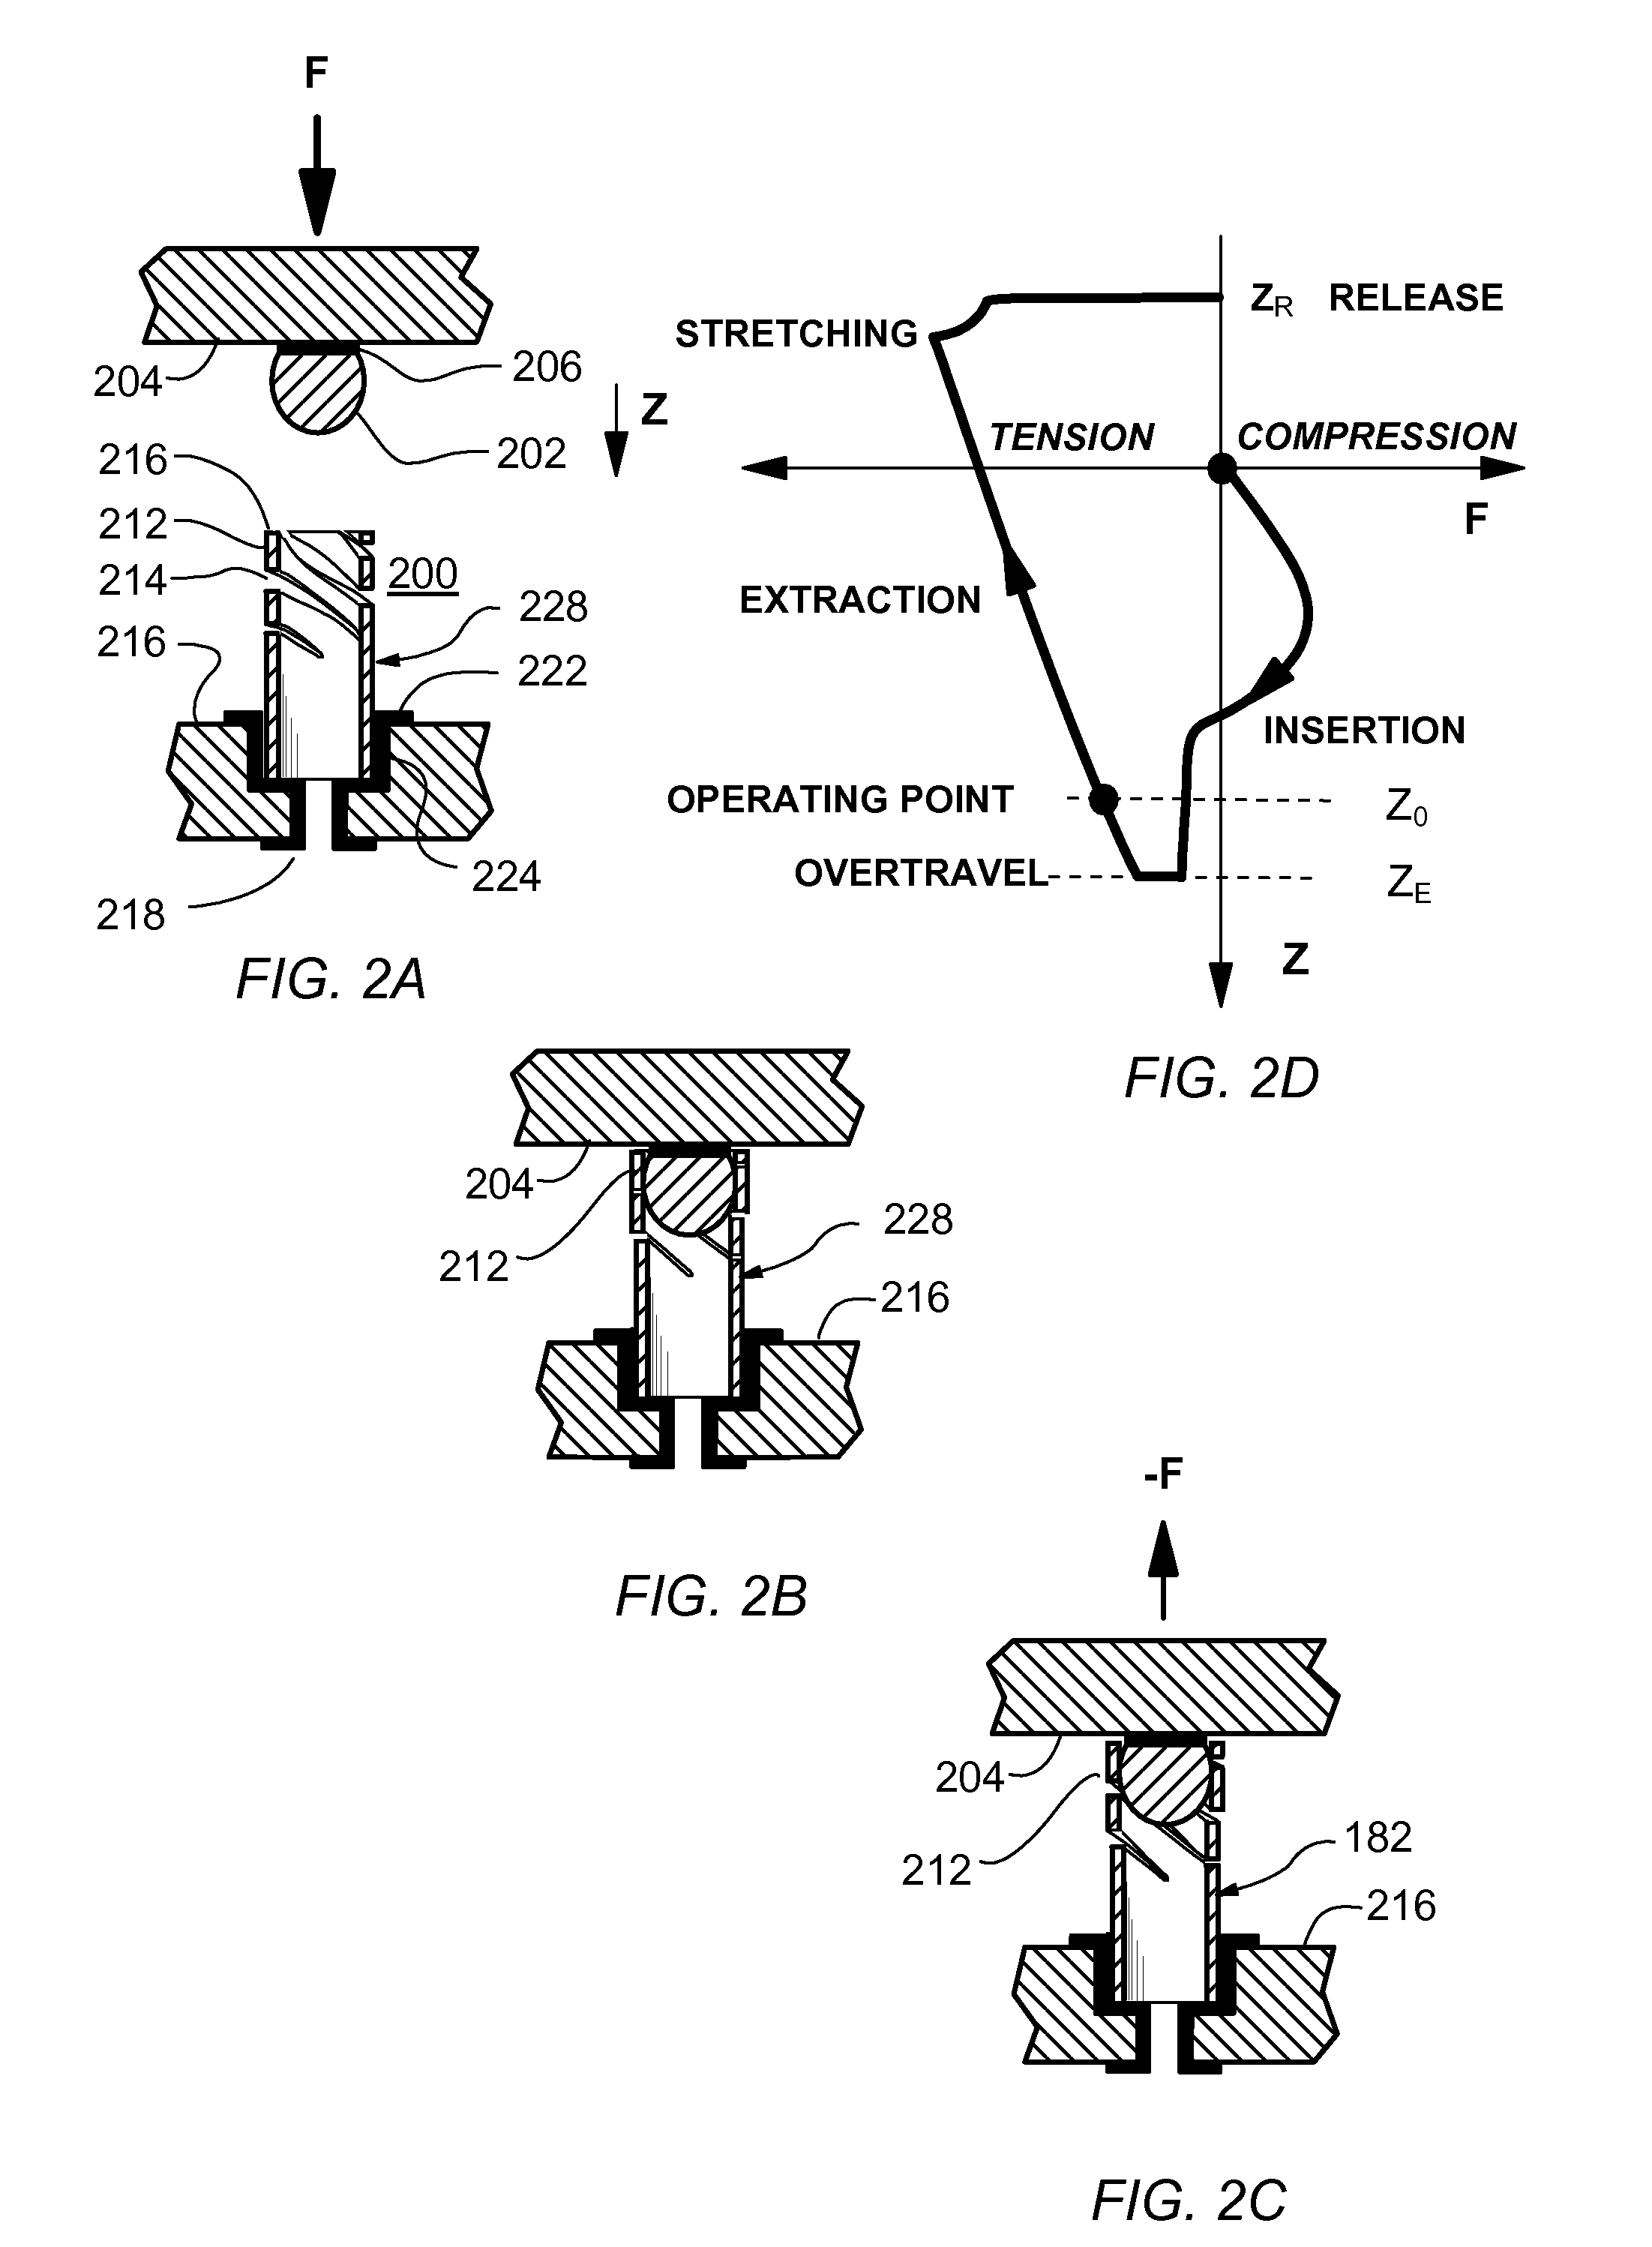 Miniature electrical ball and tube socket assembly with self-capturing multiple-contact-point coupling